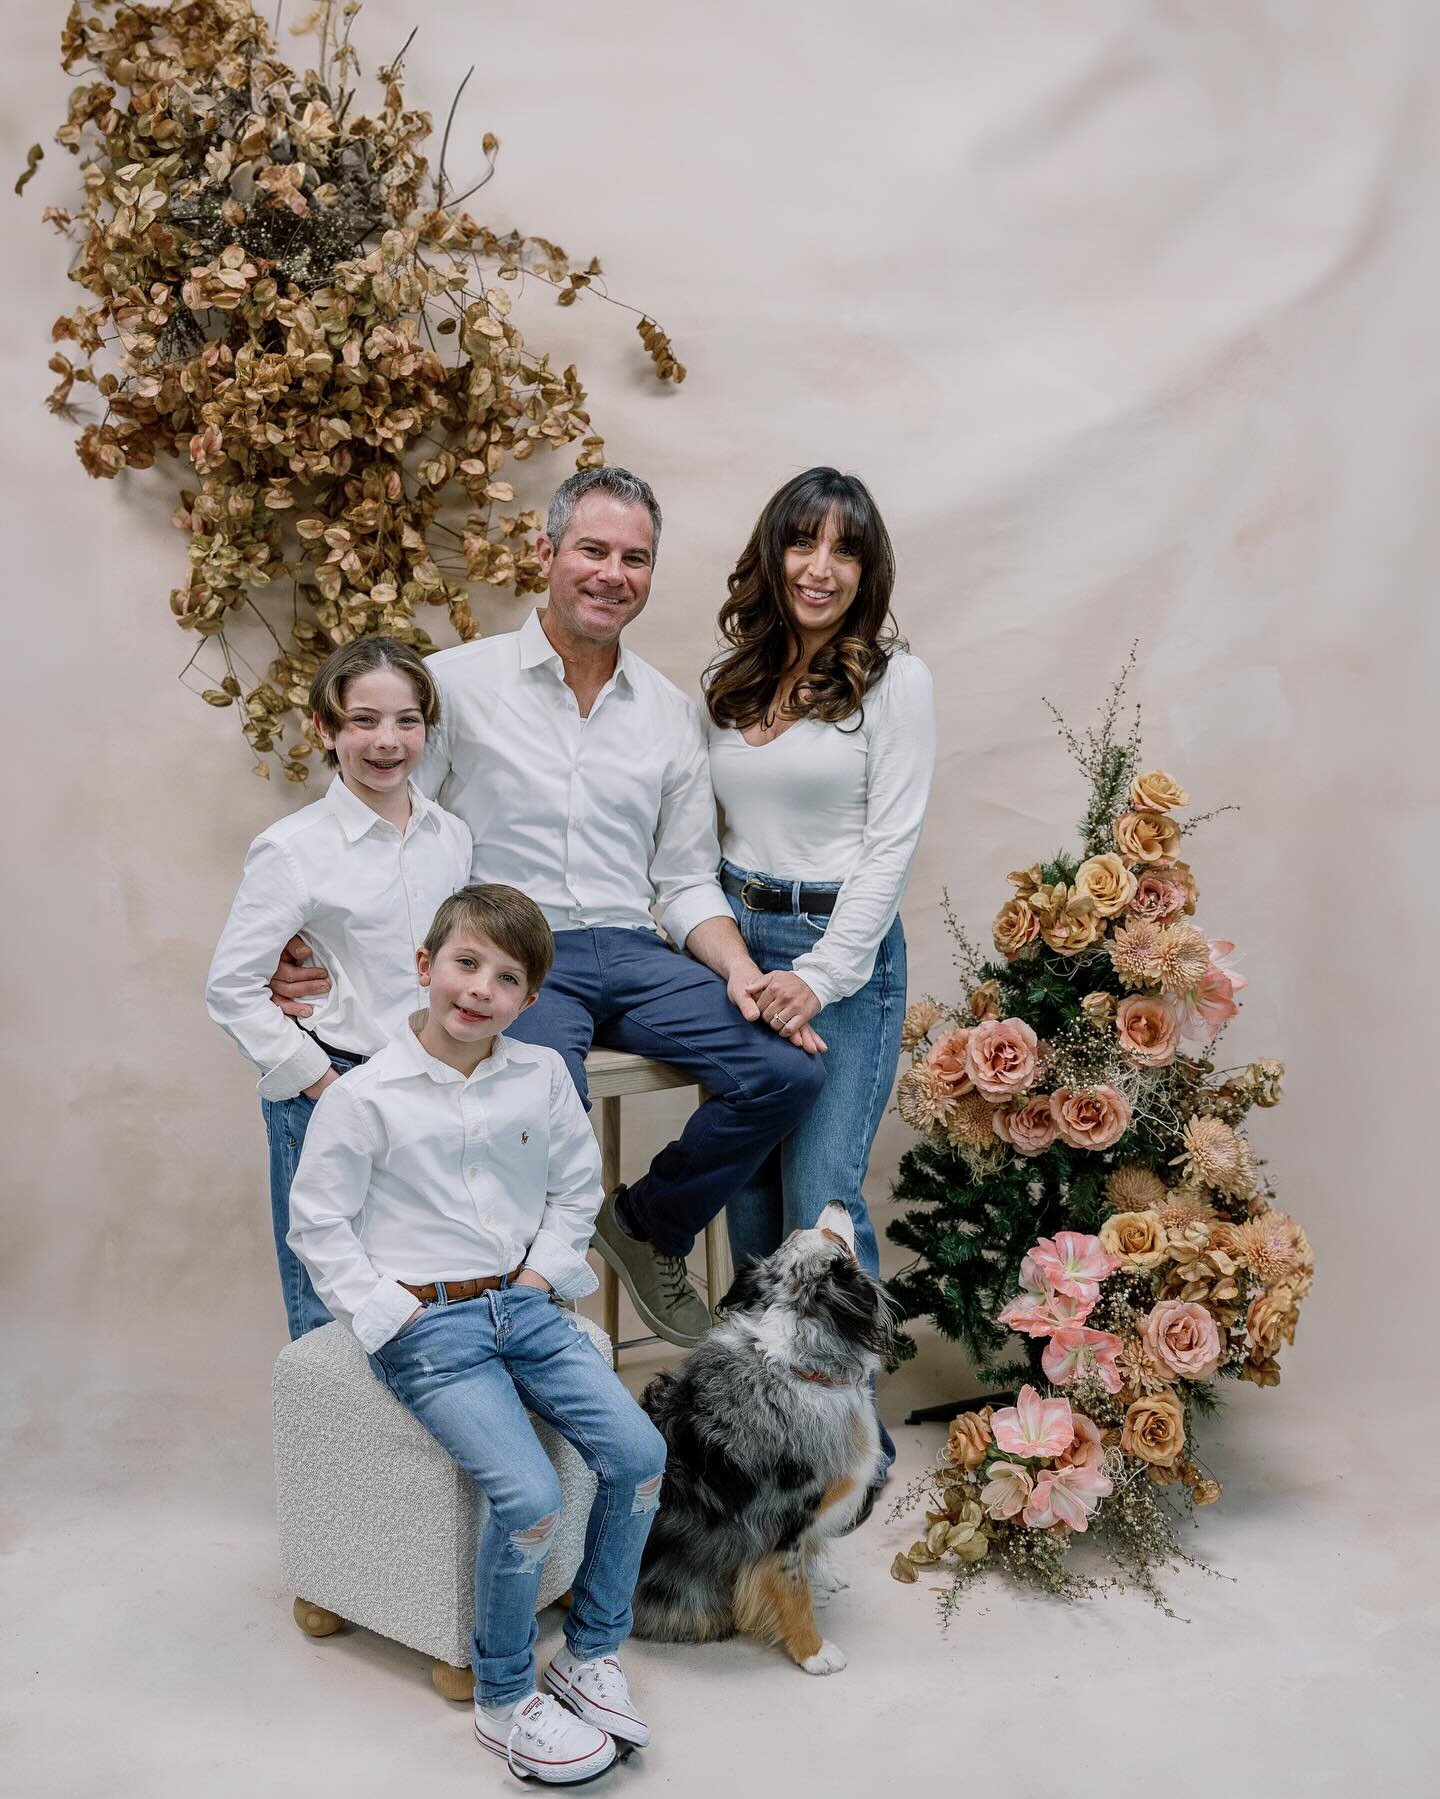 Happy Holidays from our family to yours! 

@catherine_leanne | @statussalonlivermore | @girl_with_a_curlingiron 

#happyholidays #aussiesofinstagram #familyphotographer